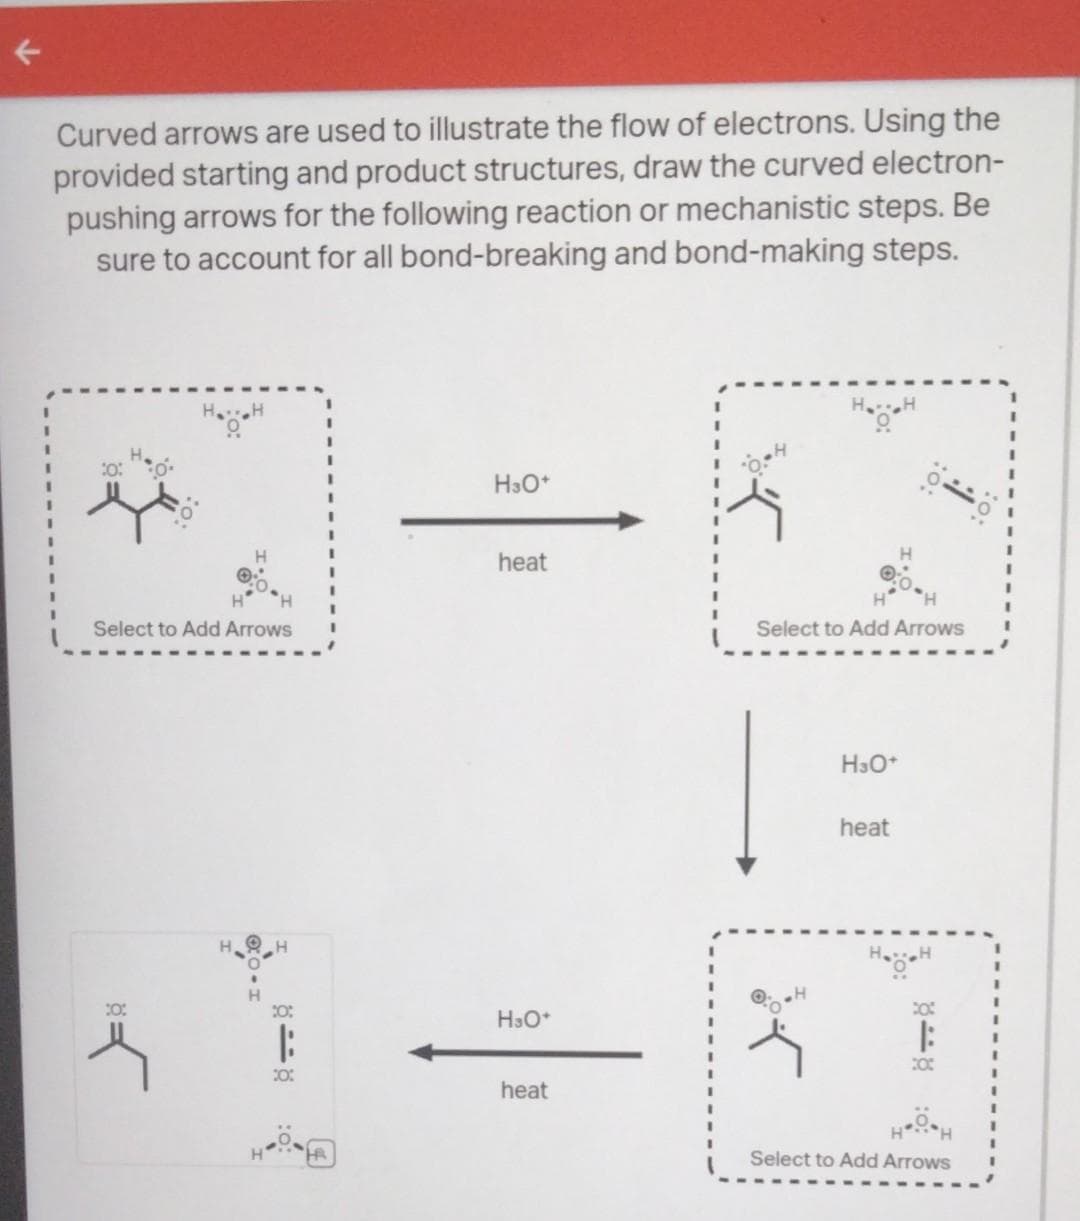 Curved arrows are used to illustrate the flow of electrons. Using the
provided starting and product structures, draw the curved electron-
pushing arrows for the following reaction or mechanistic steps. Be
sure to account for all bond-breaking and bond-making steps.
Select to Add Arrows
10:
पर
20:
|
20:
H3O+
heat
H3O+
heat
K
H₂H
Select to Add Arrows
H3O+
heat
848
Select to Add Arrows